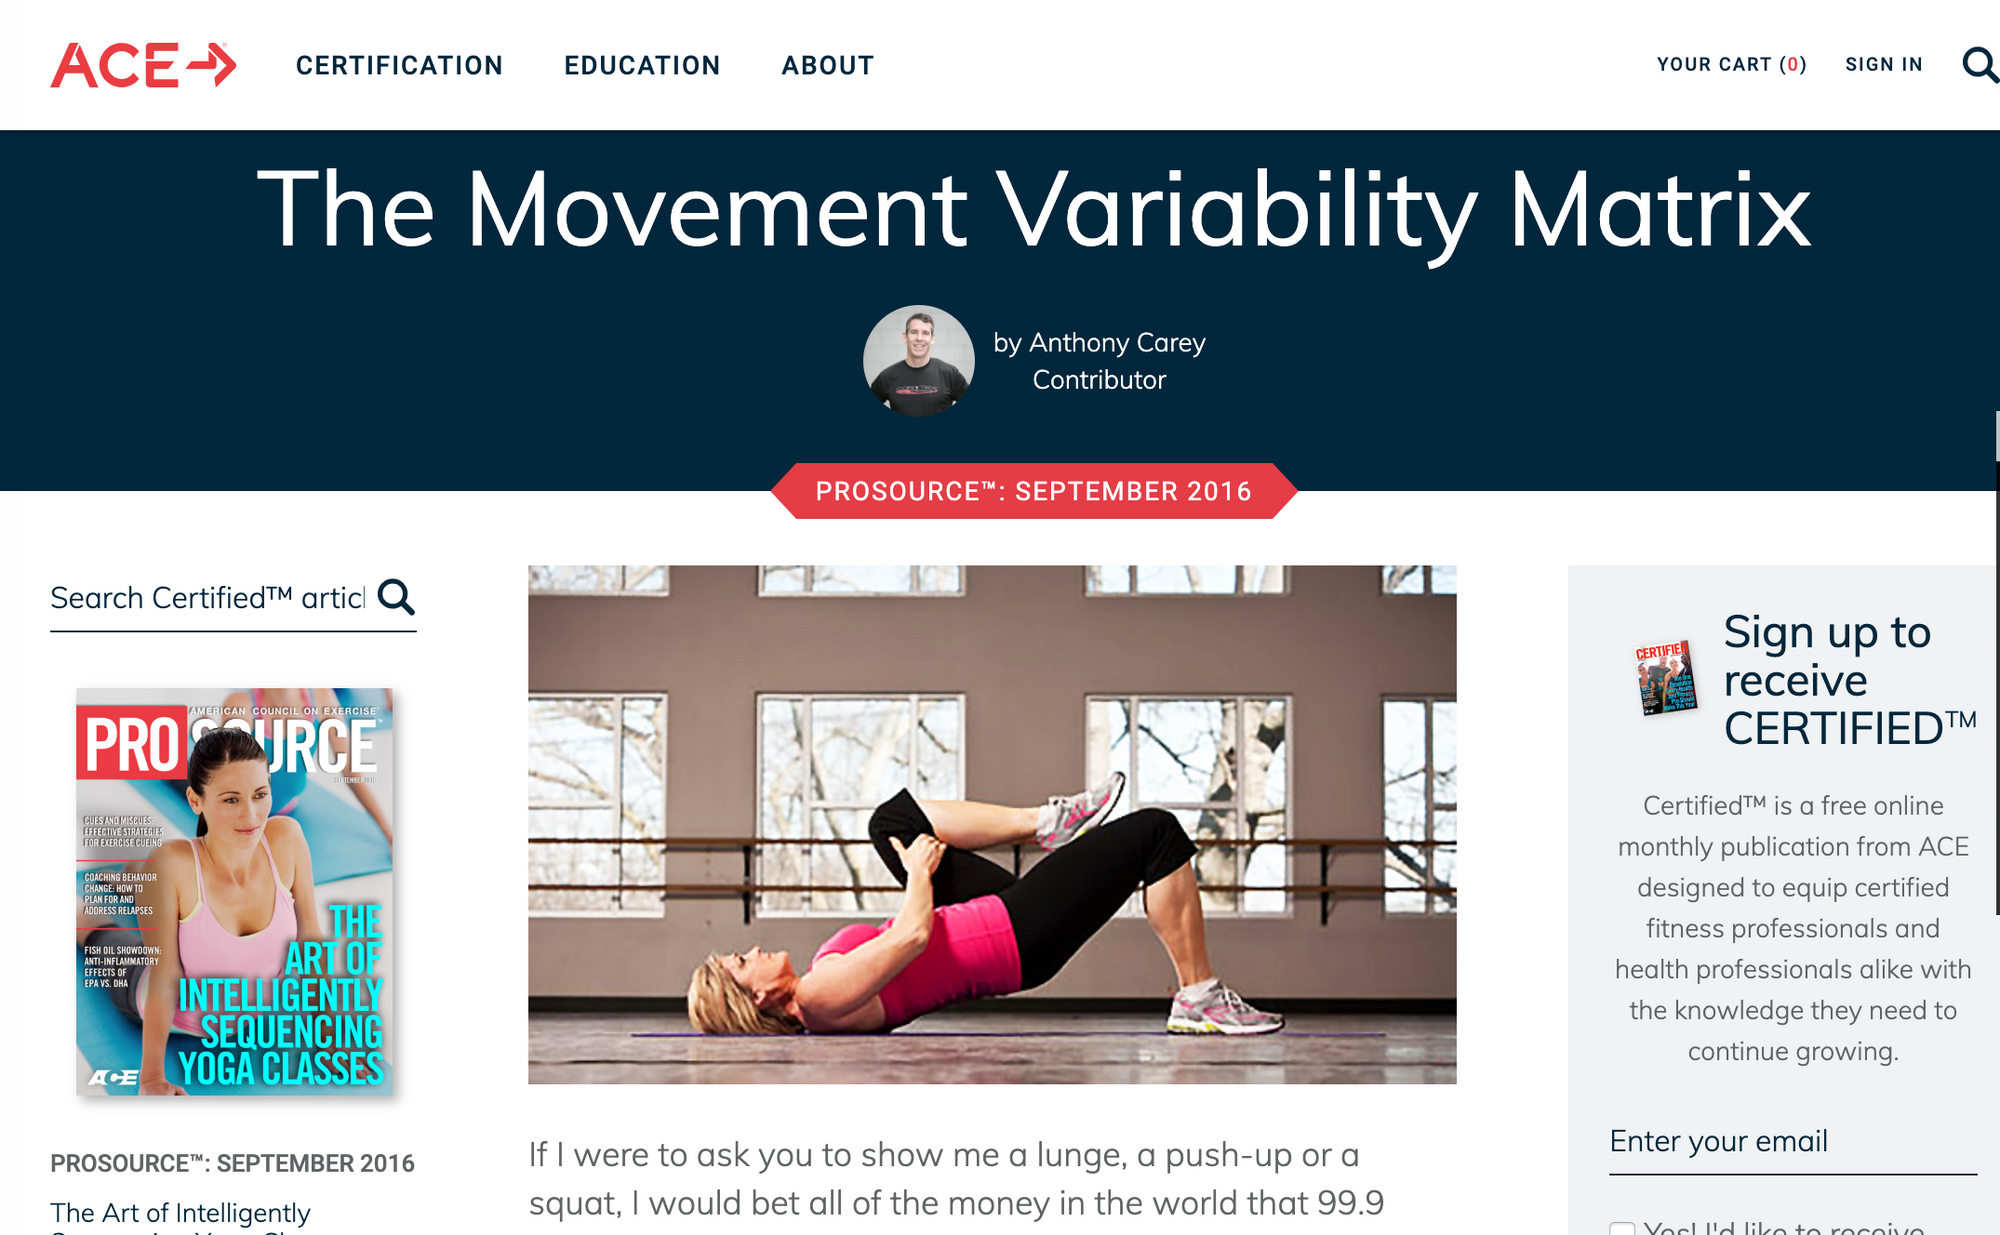 AMERICAN COUNCIL ON EXERCISE PRO SOURCE MAGAZINE, SEPTEMBER 2016: The Movement Variability Matrix